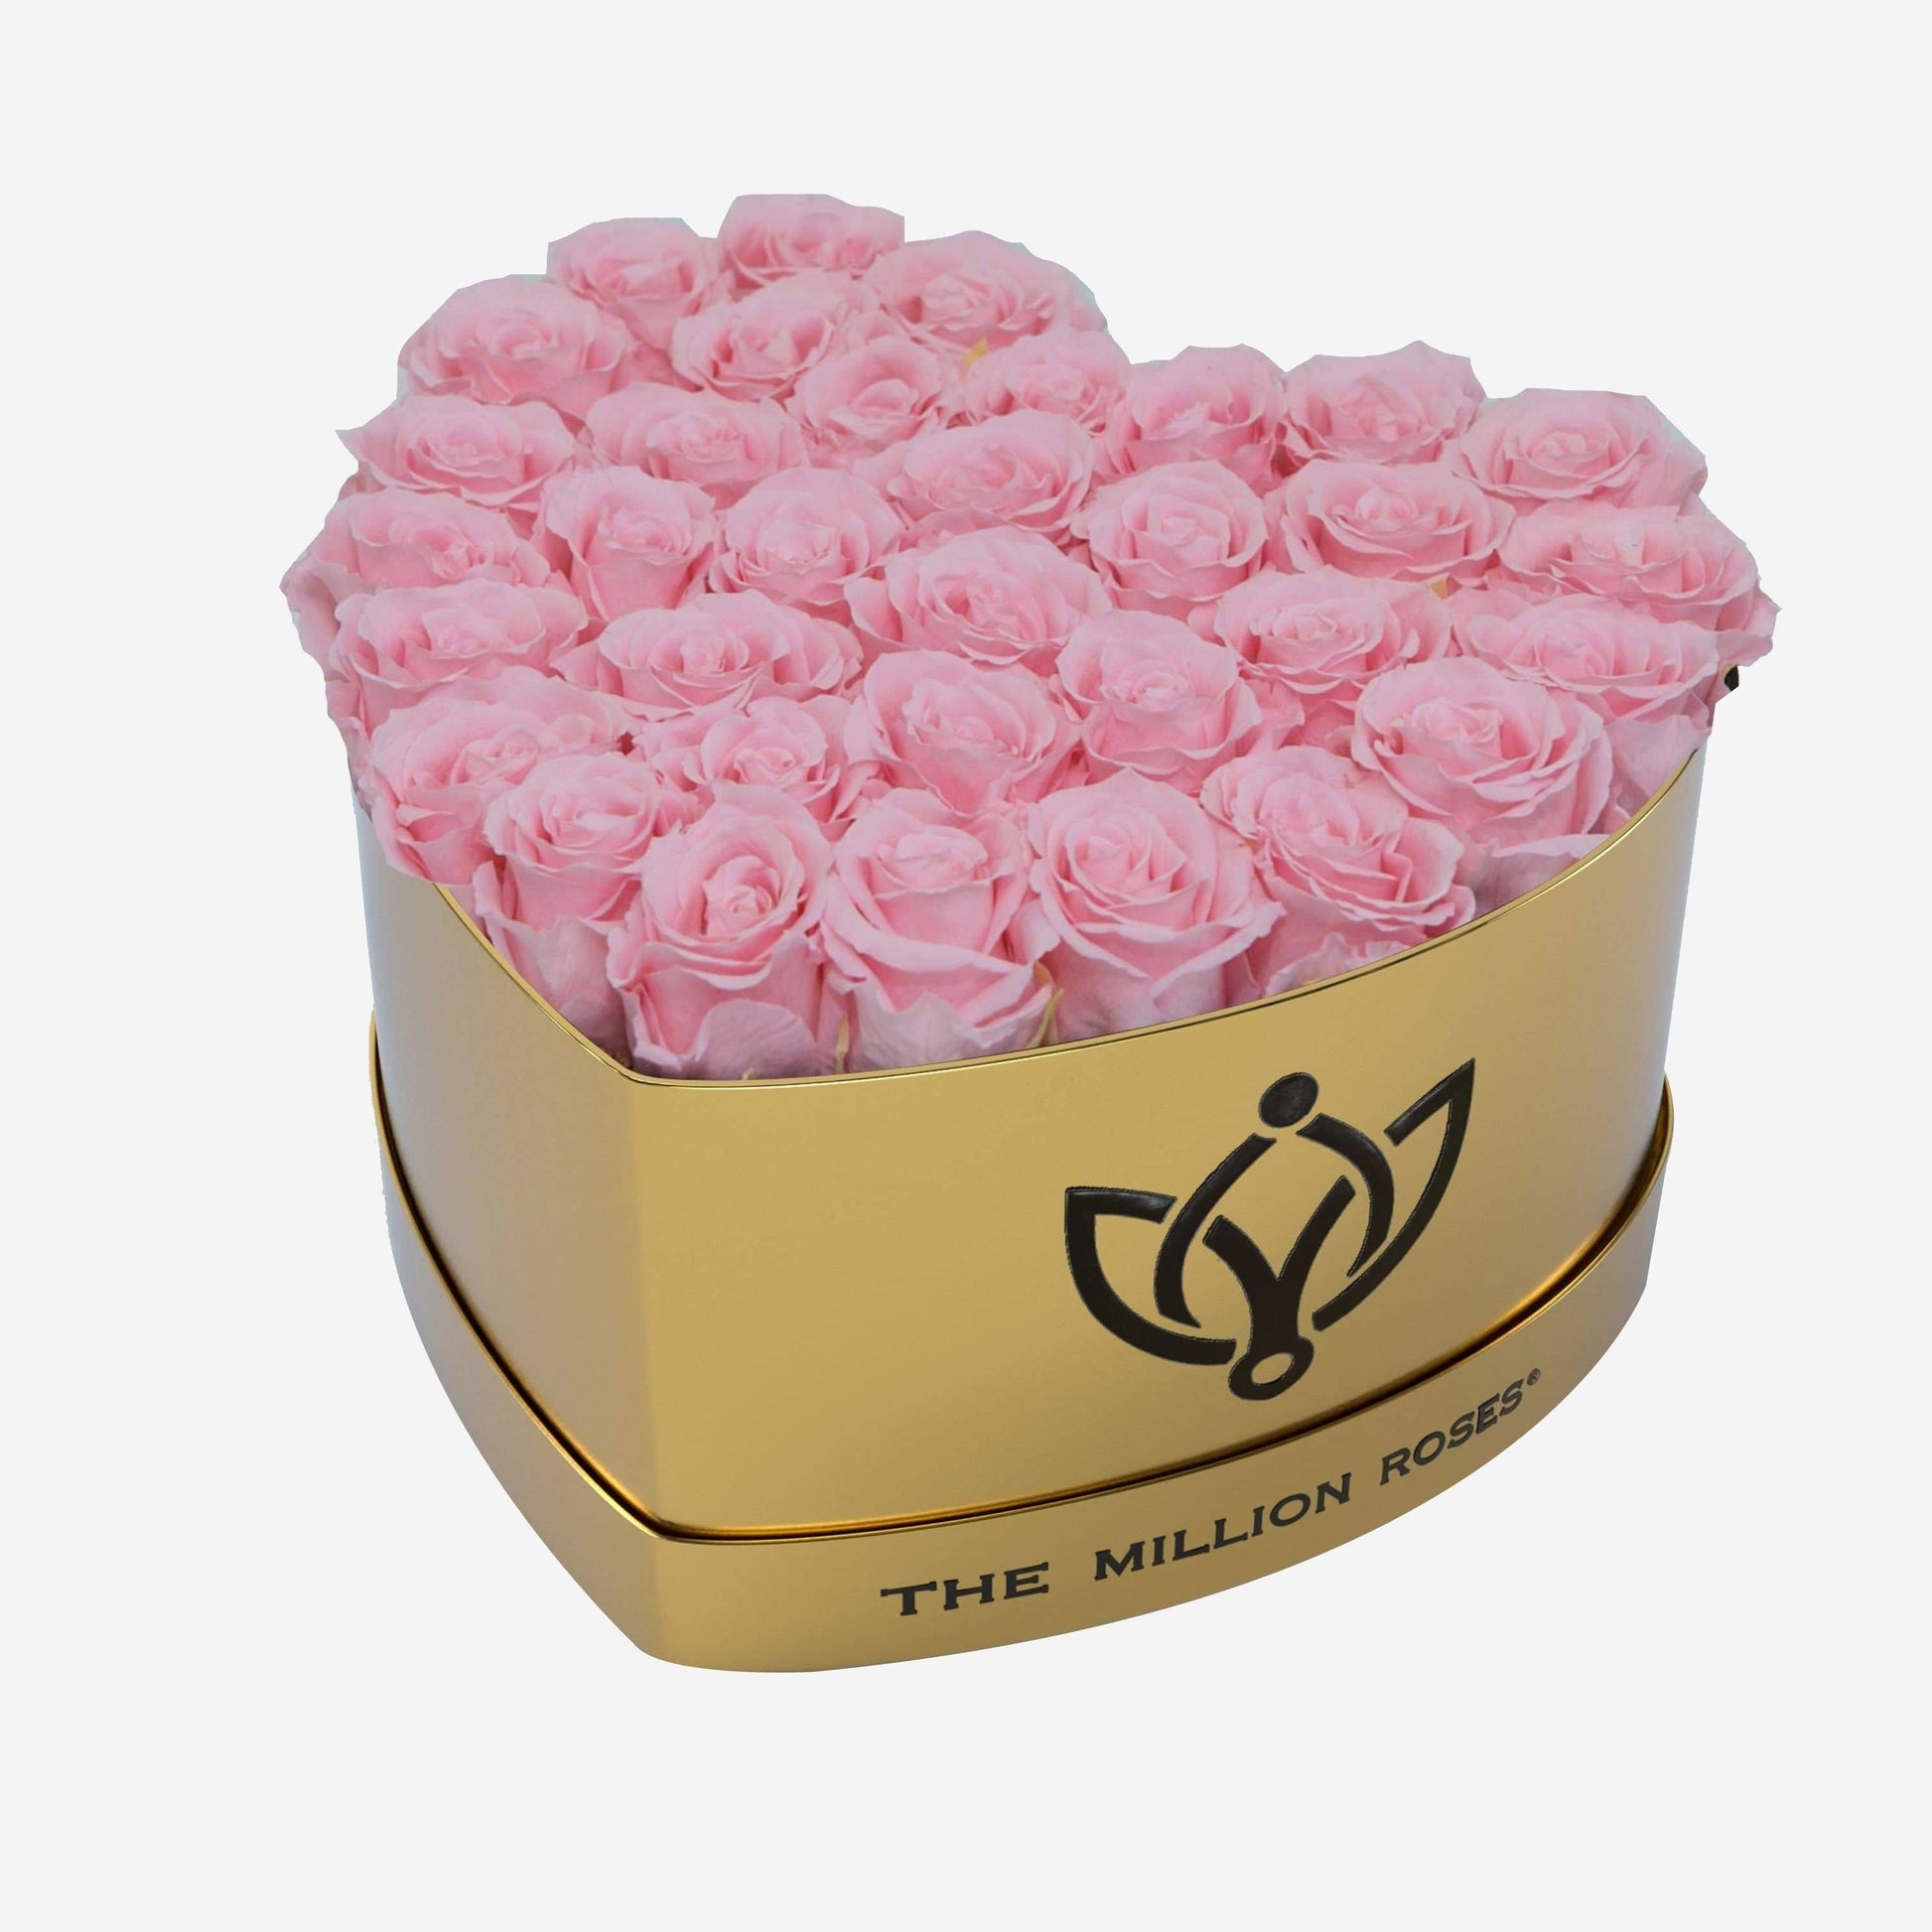 Heart Mirror Gold Box | Light Pink Roses - The Million Roses